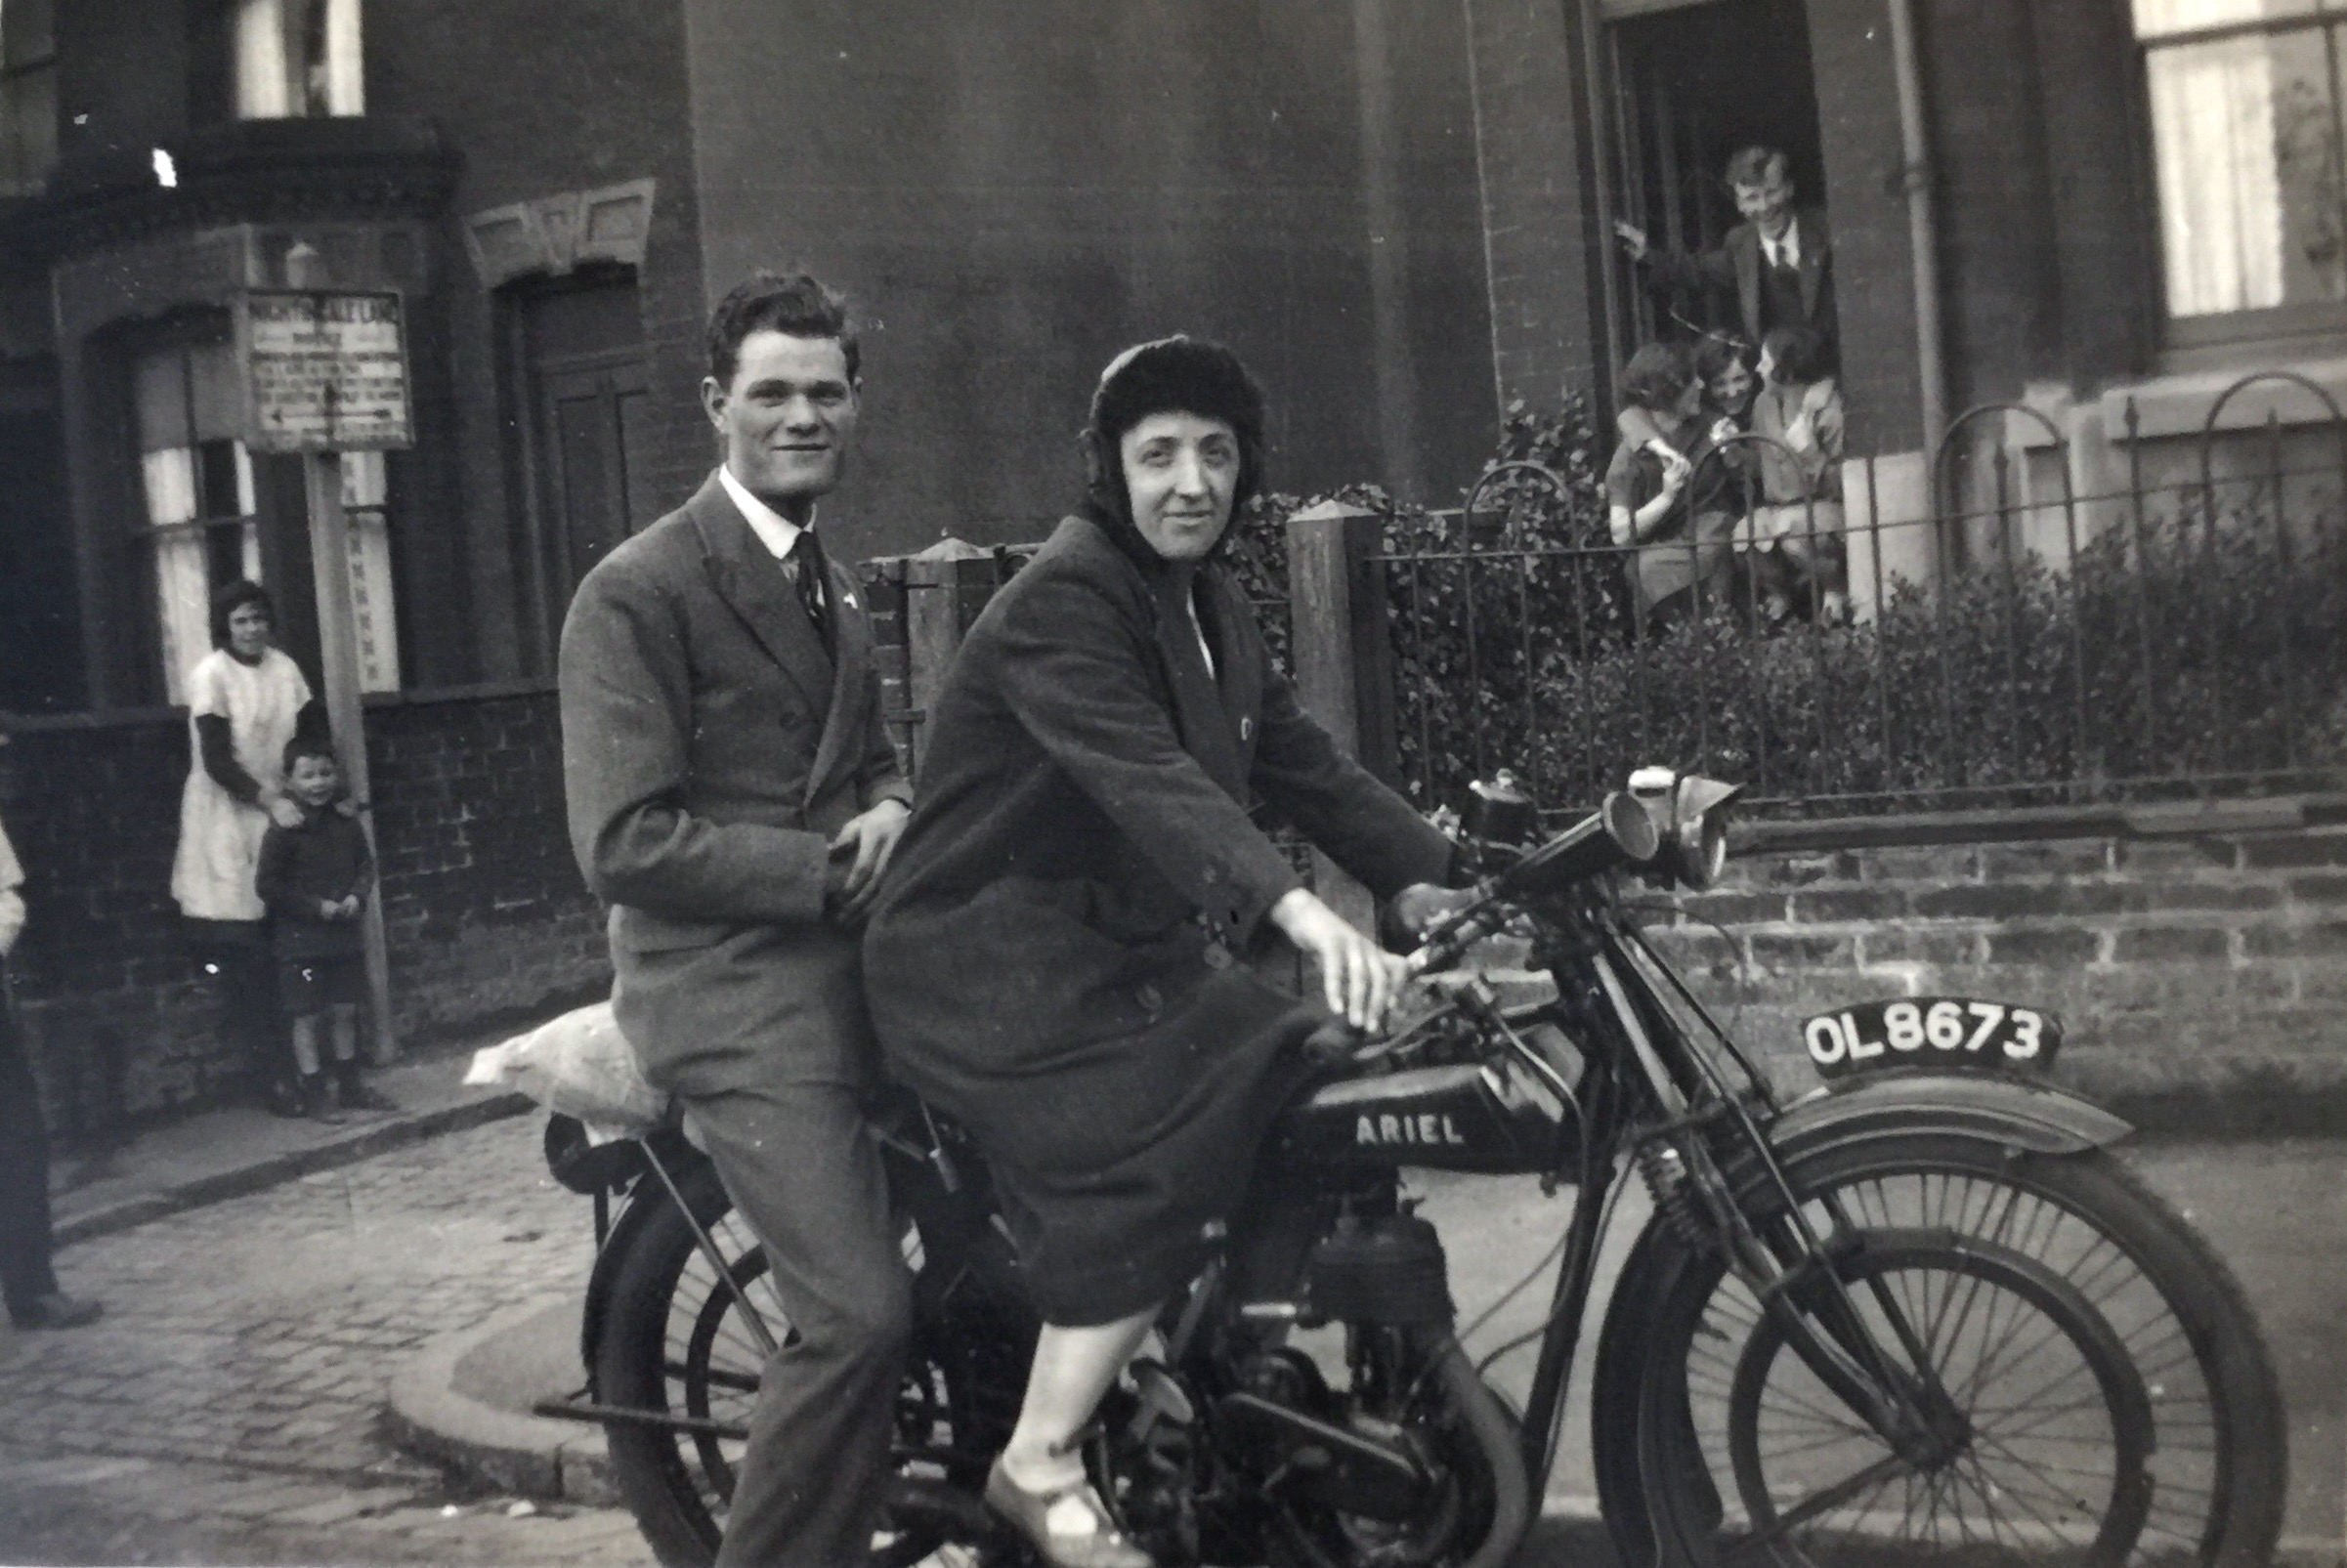 Born to be wild ! Taking the bike for a spin in London, England. 1930.